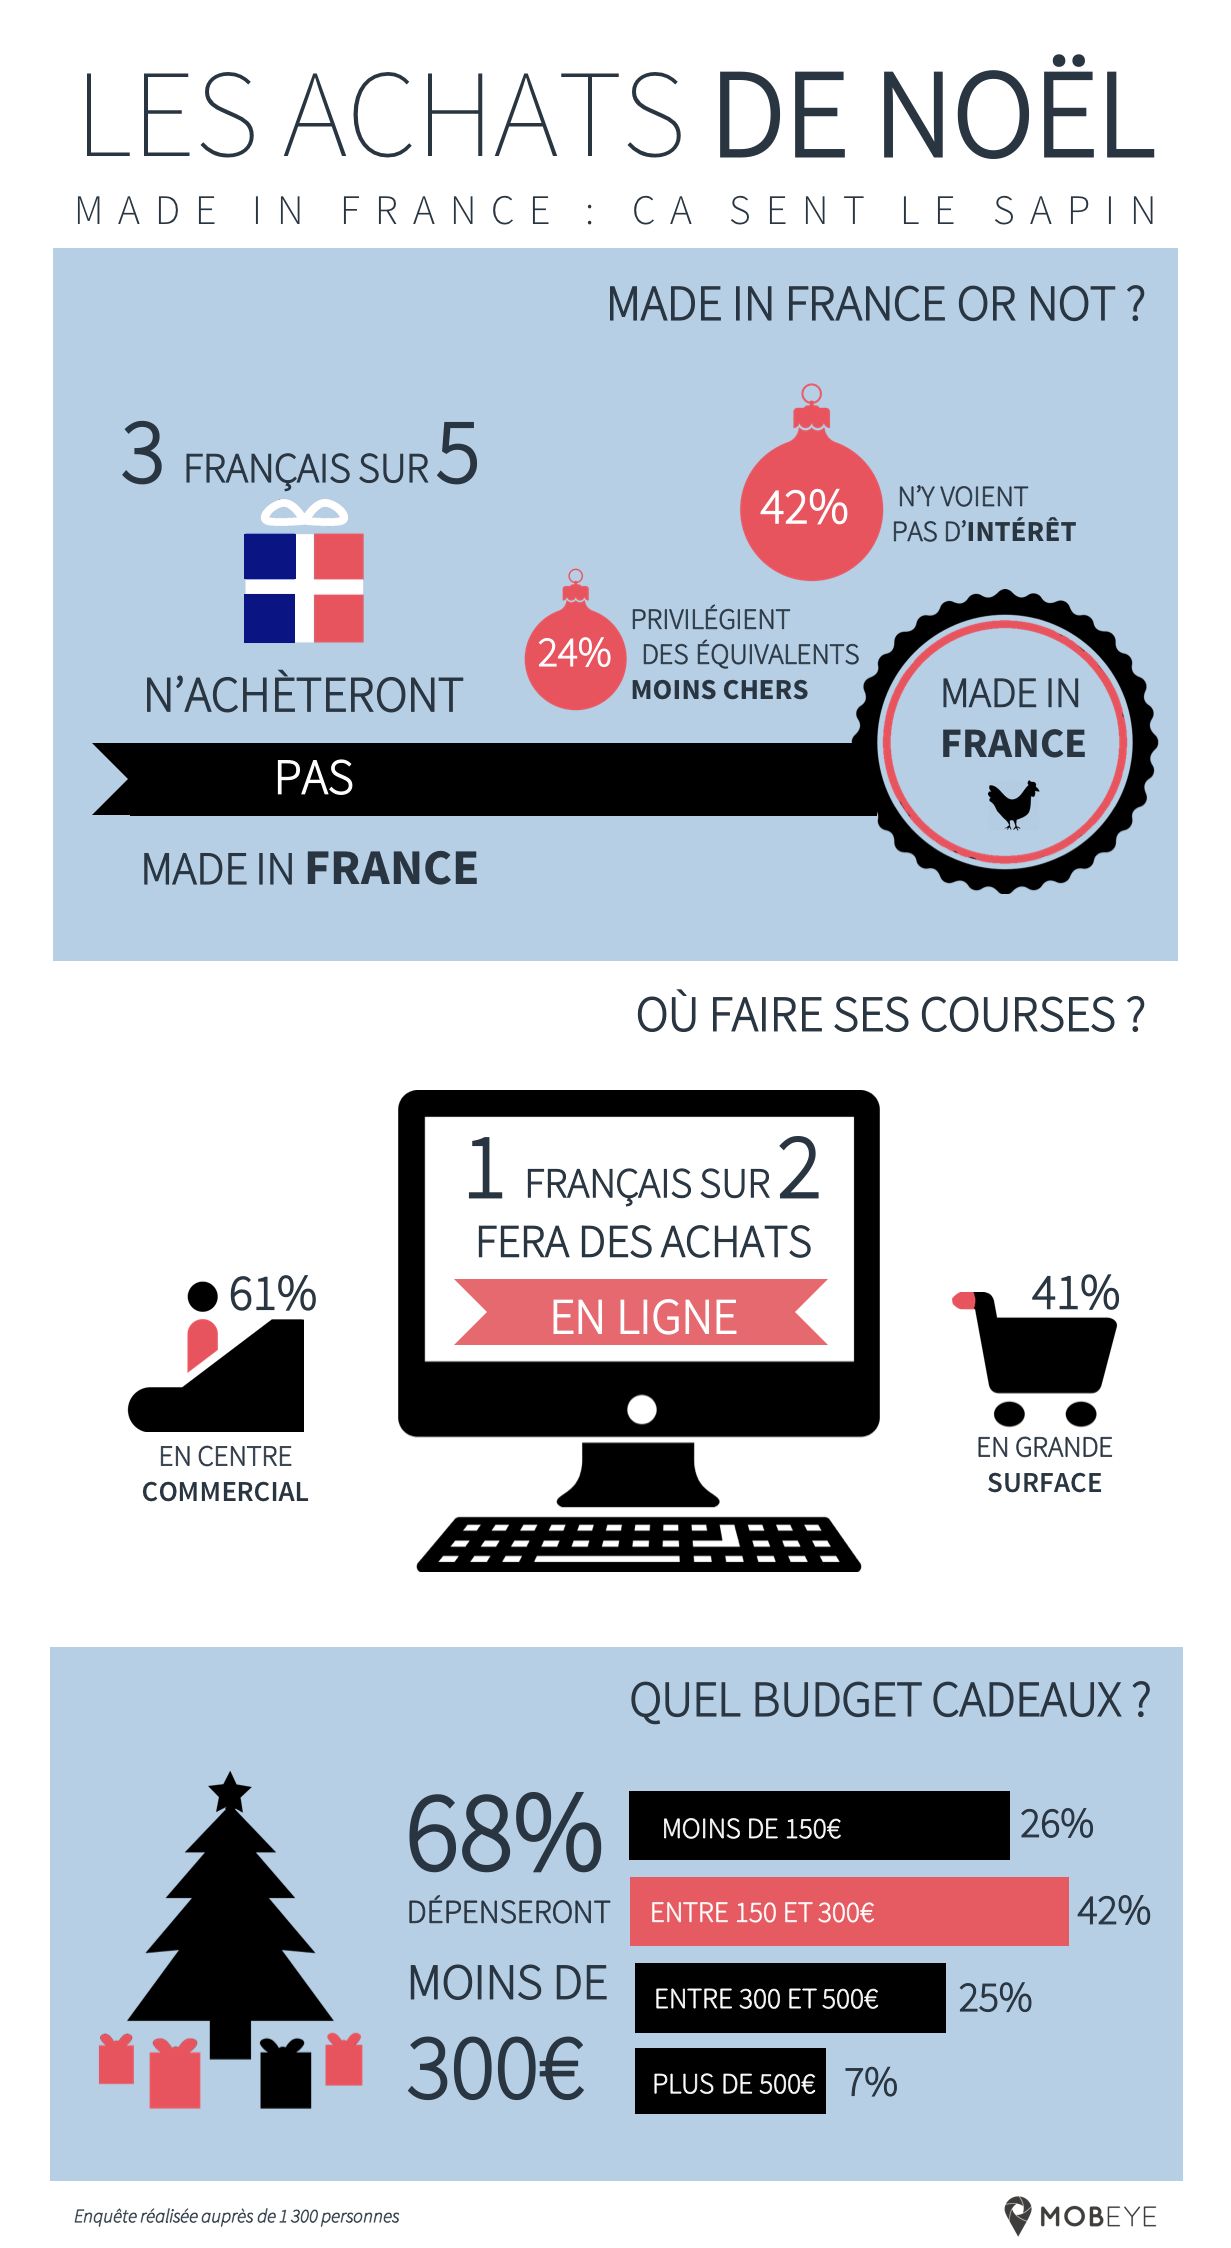 Noël 2015 : infographie Achats de Noël Made in France or not